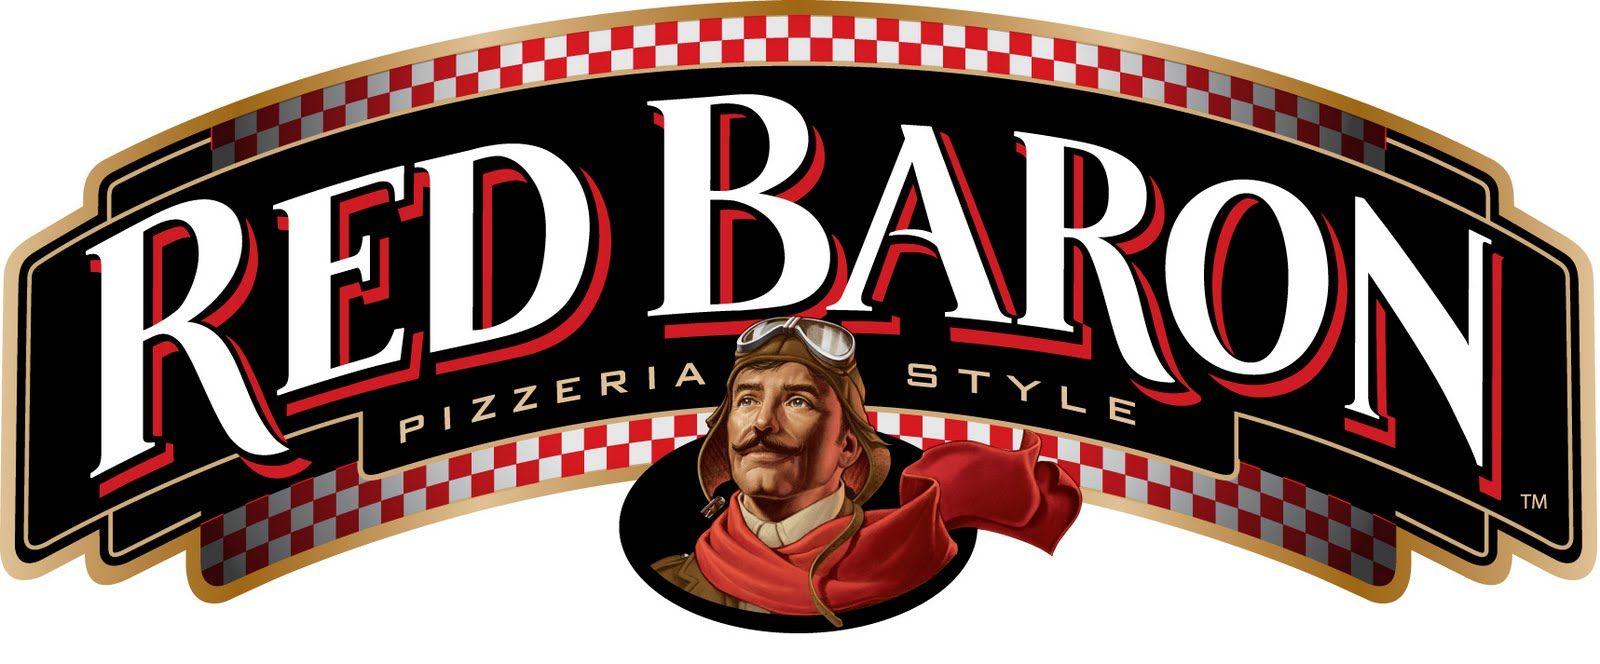 Red Baron Logo - Red Baron Pizza, Less Than $2 Each!